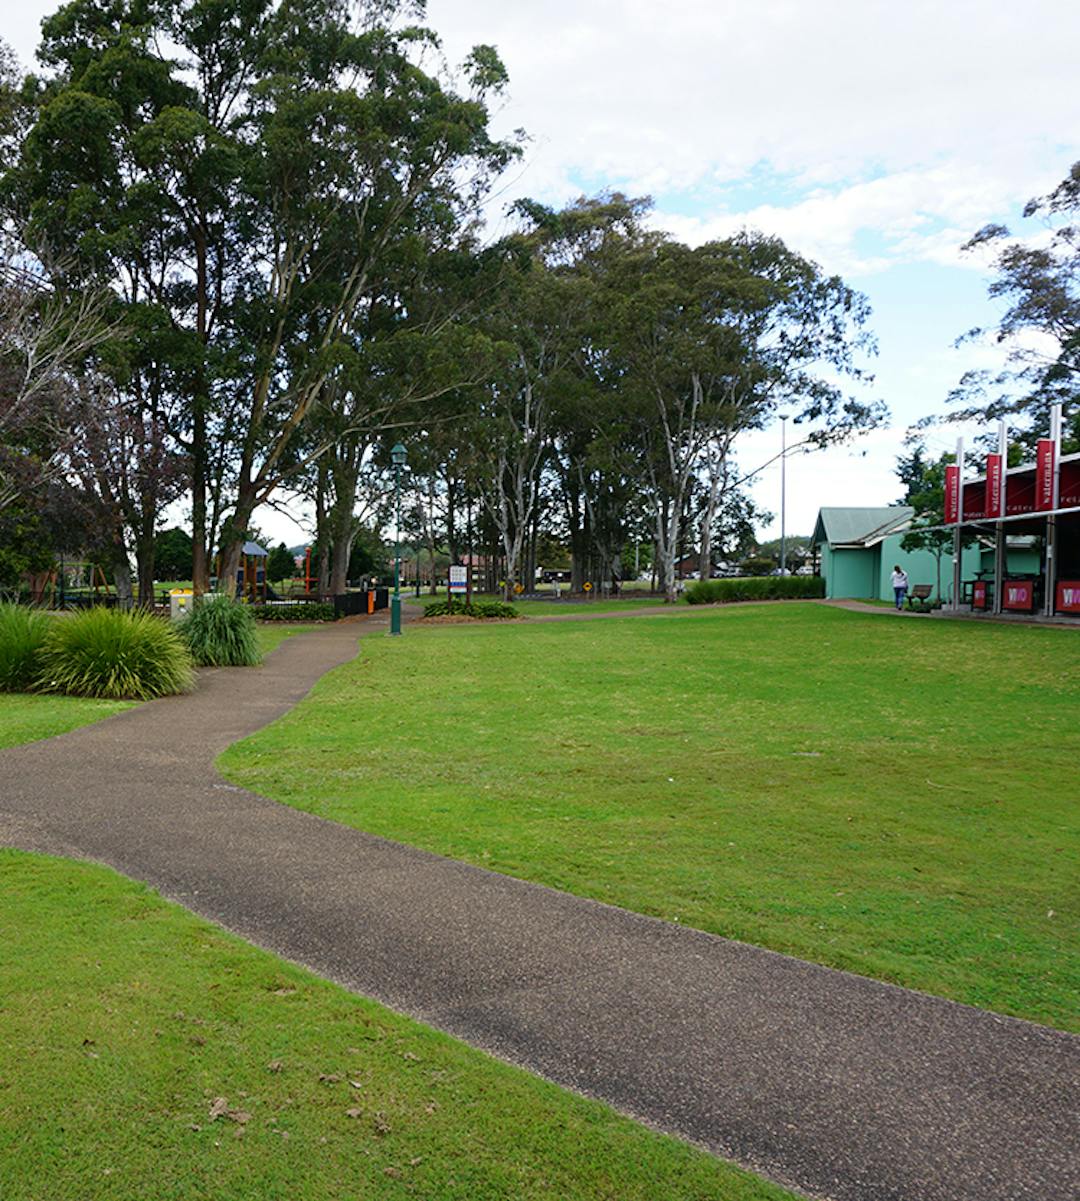 Bain Park is a significant recreational space located in the centre of Wauchope’s CBD.  Council will be embarking on a series of comprehensive community engagement activities in order to prepare a Master Plan to guide future development.

Widespread community engagement and participation is vital to ensure all members of the community have the opportunity to have their say and provide feedback on the development of the plan.
